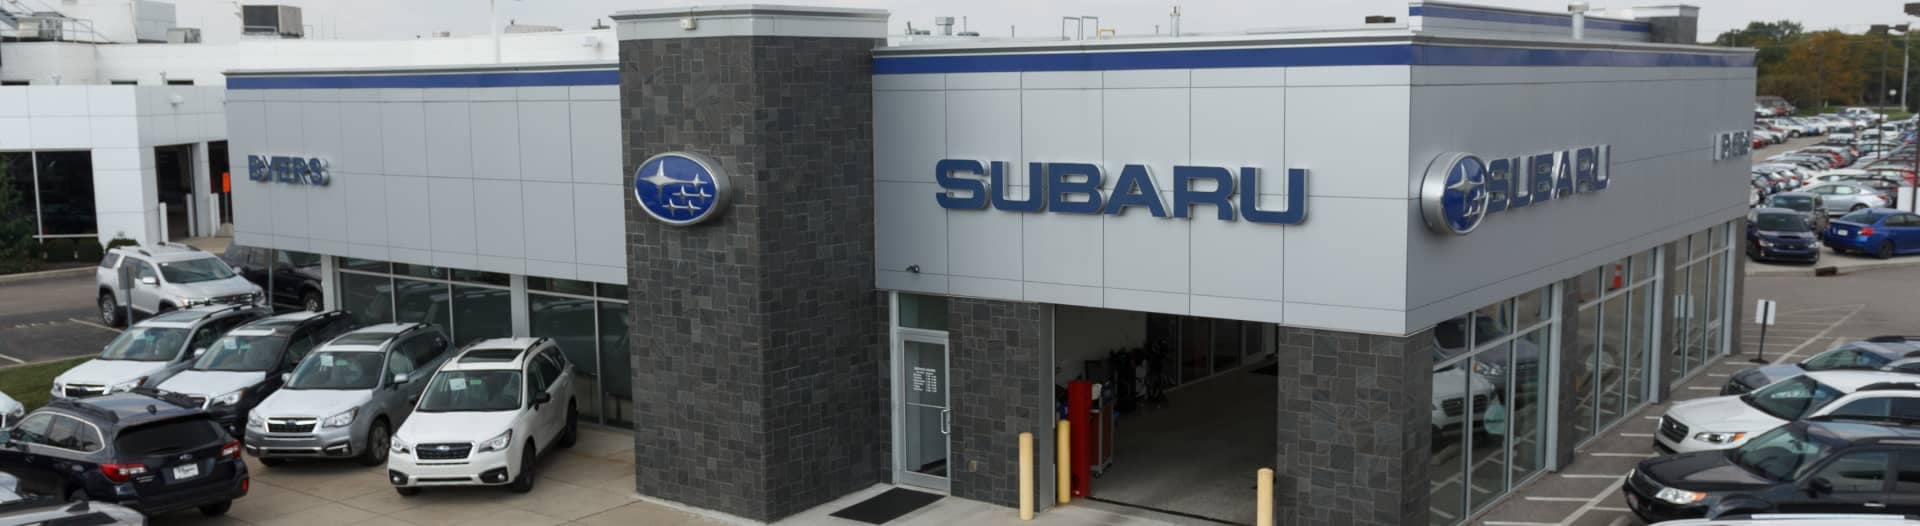 An exterior view of the top of Byers Dublin Subaru